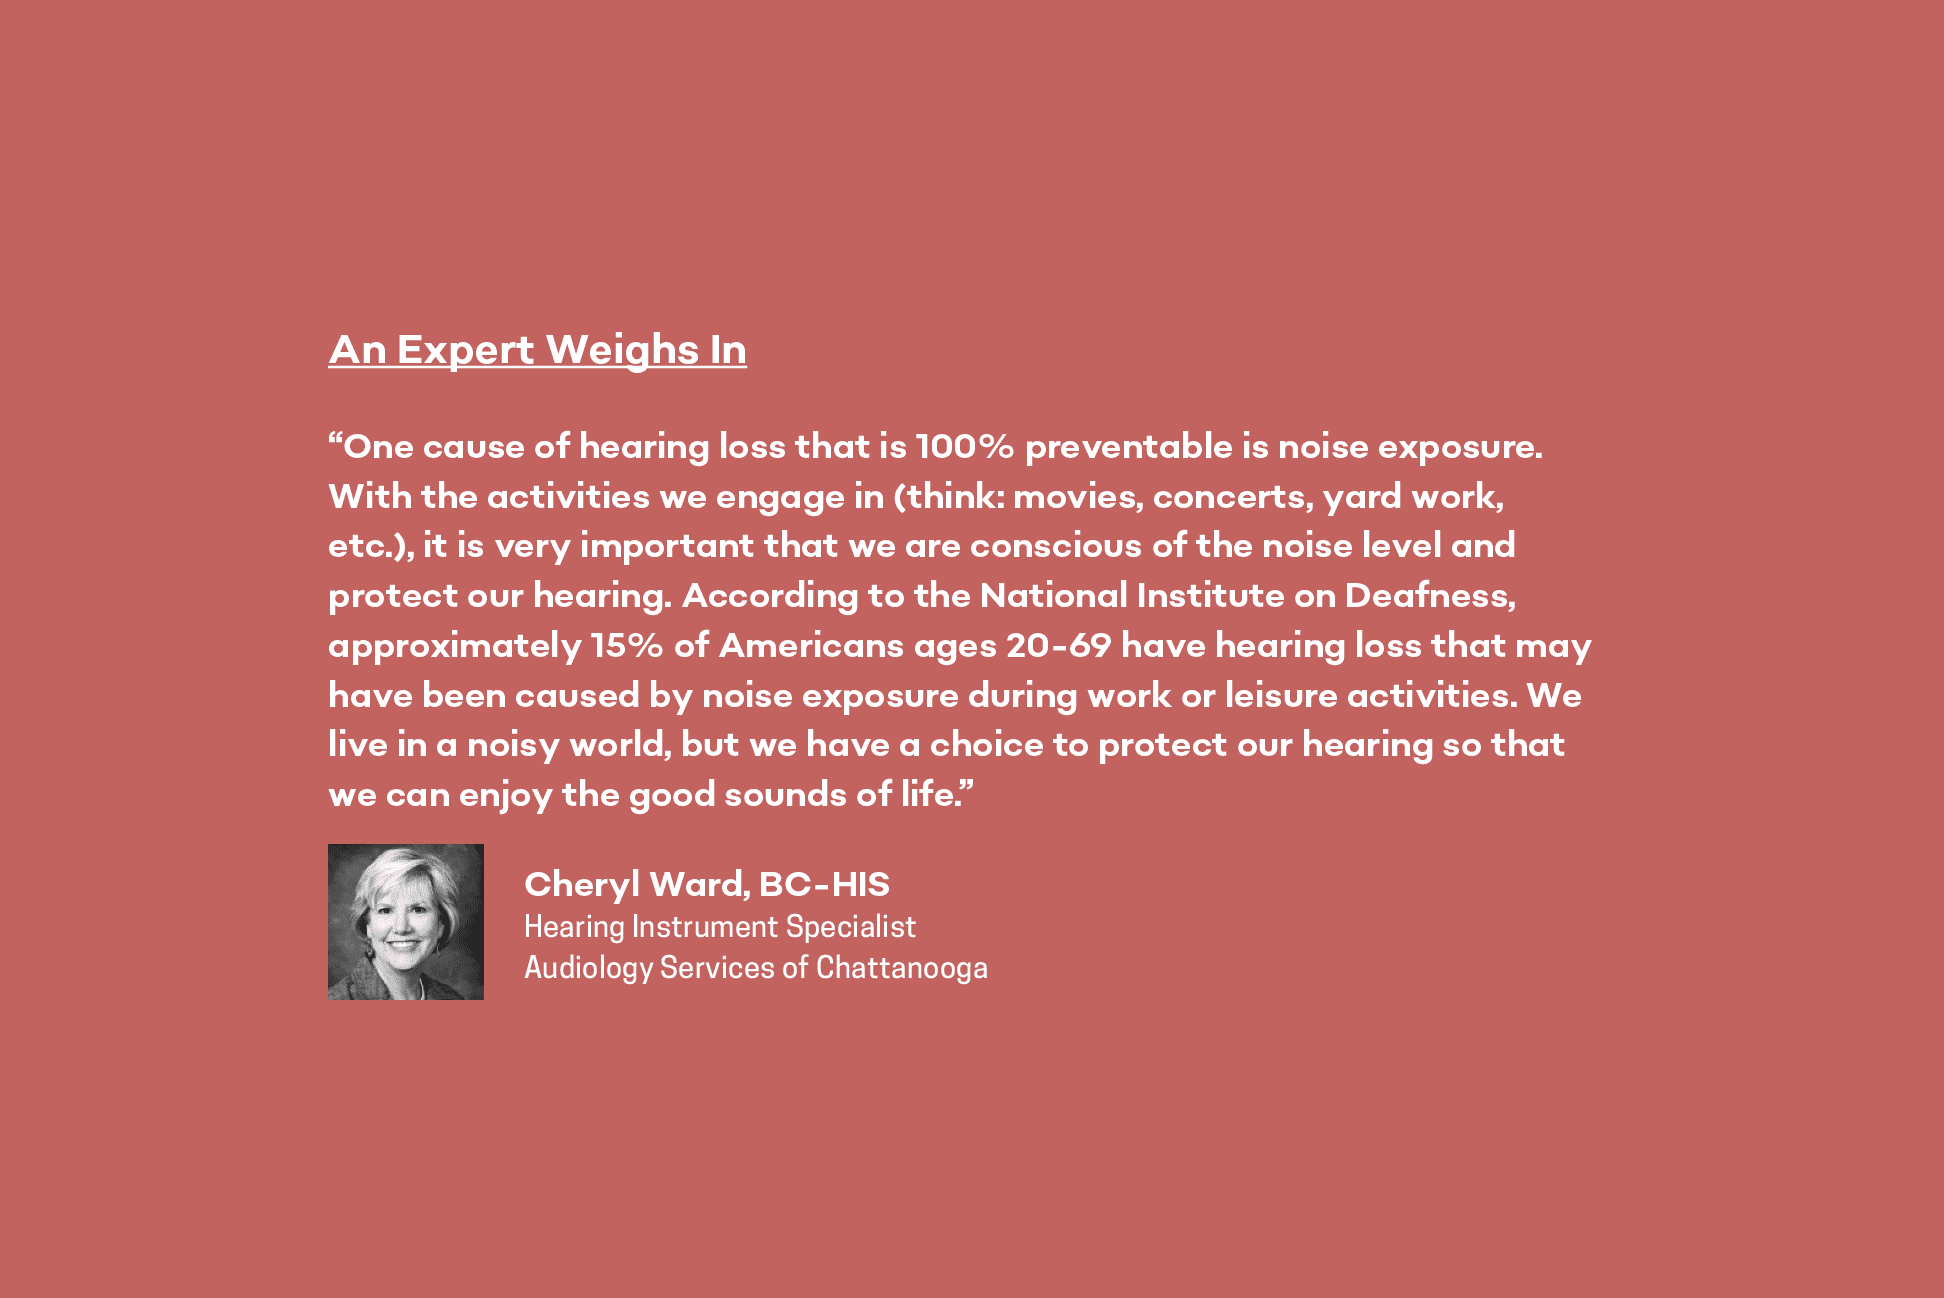 expert opinion on hearing loss and your health from cheryl ward, bc-his at audiology services of chattanooga